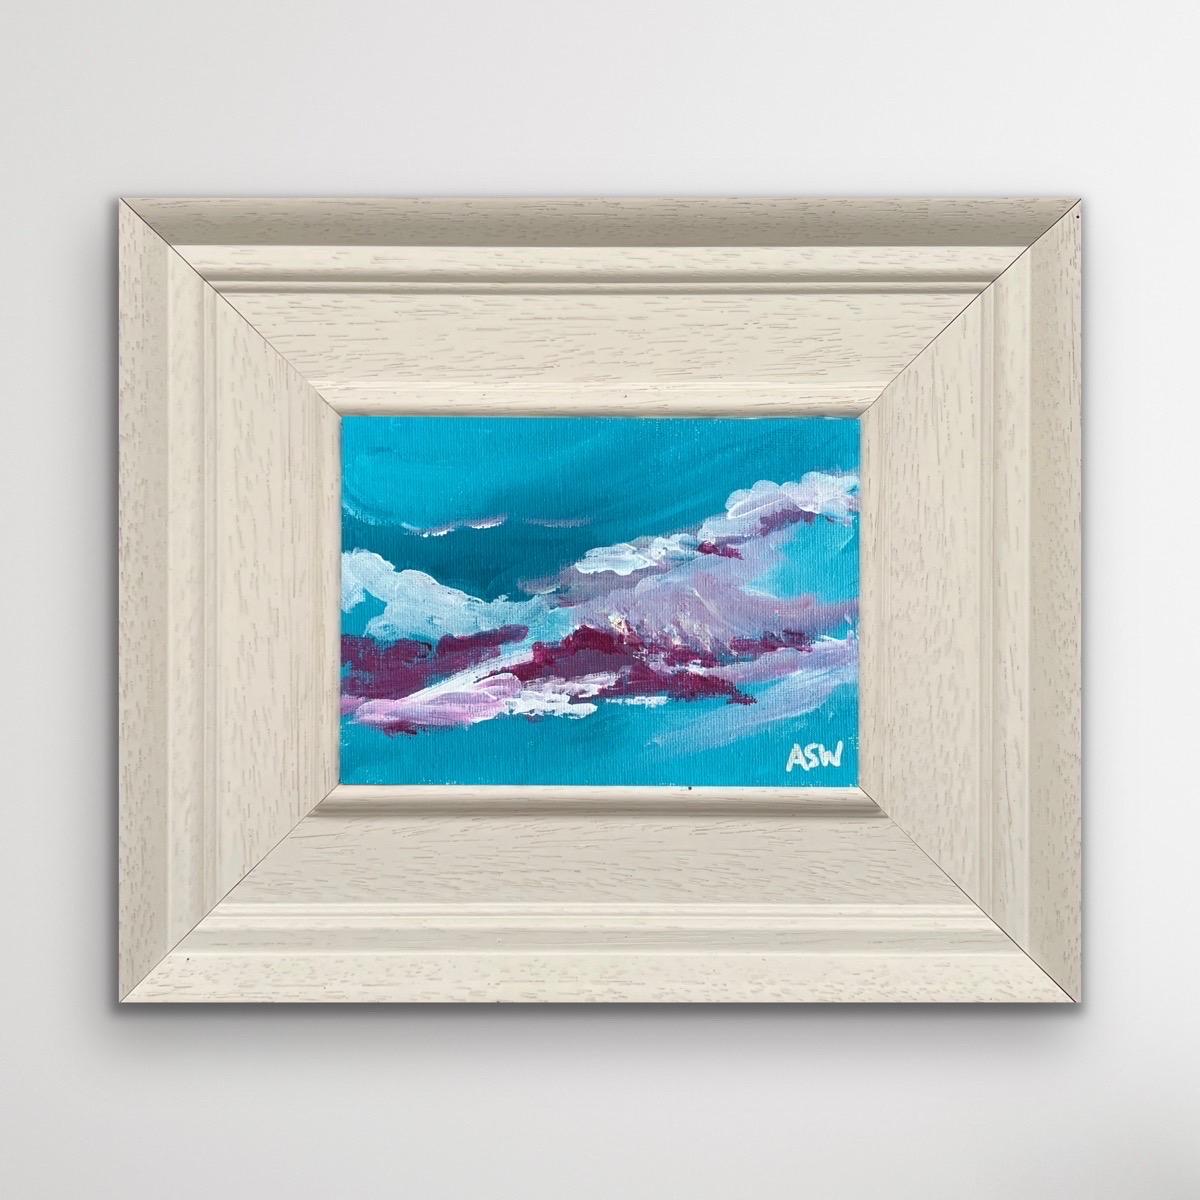 Miniature Abstract Painting on Turquoise Background with Pink & White by Contemporary British Artist, Angela Wakefield

Art measures 7 x 5 inches
Frame measures 12 x 10 inches 

Angela Wakefield has twice been on the front cover of ‘Art of England’